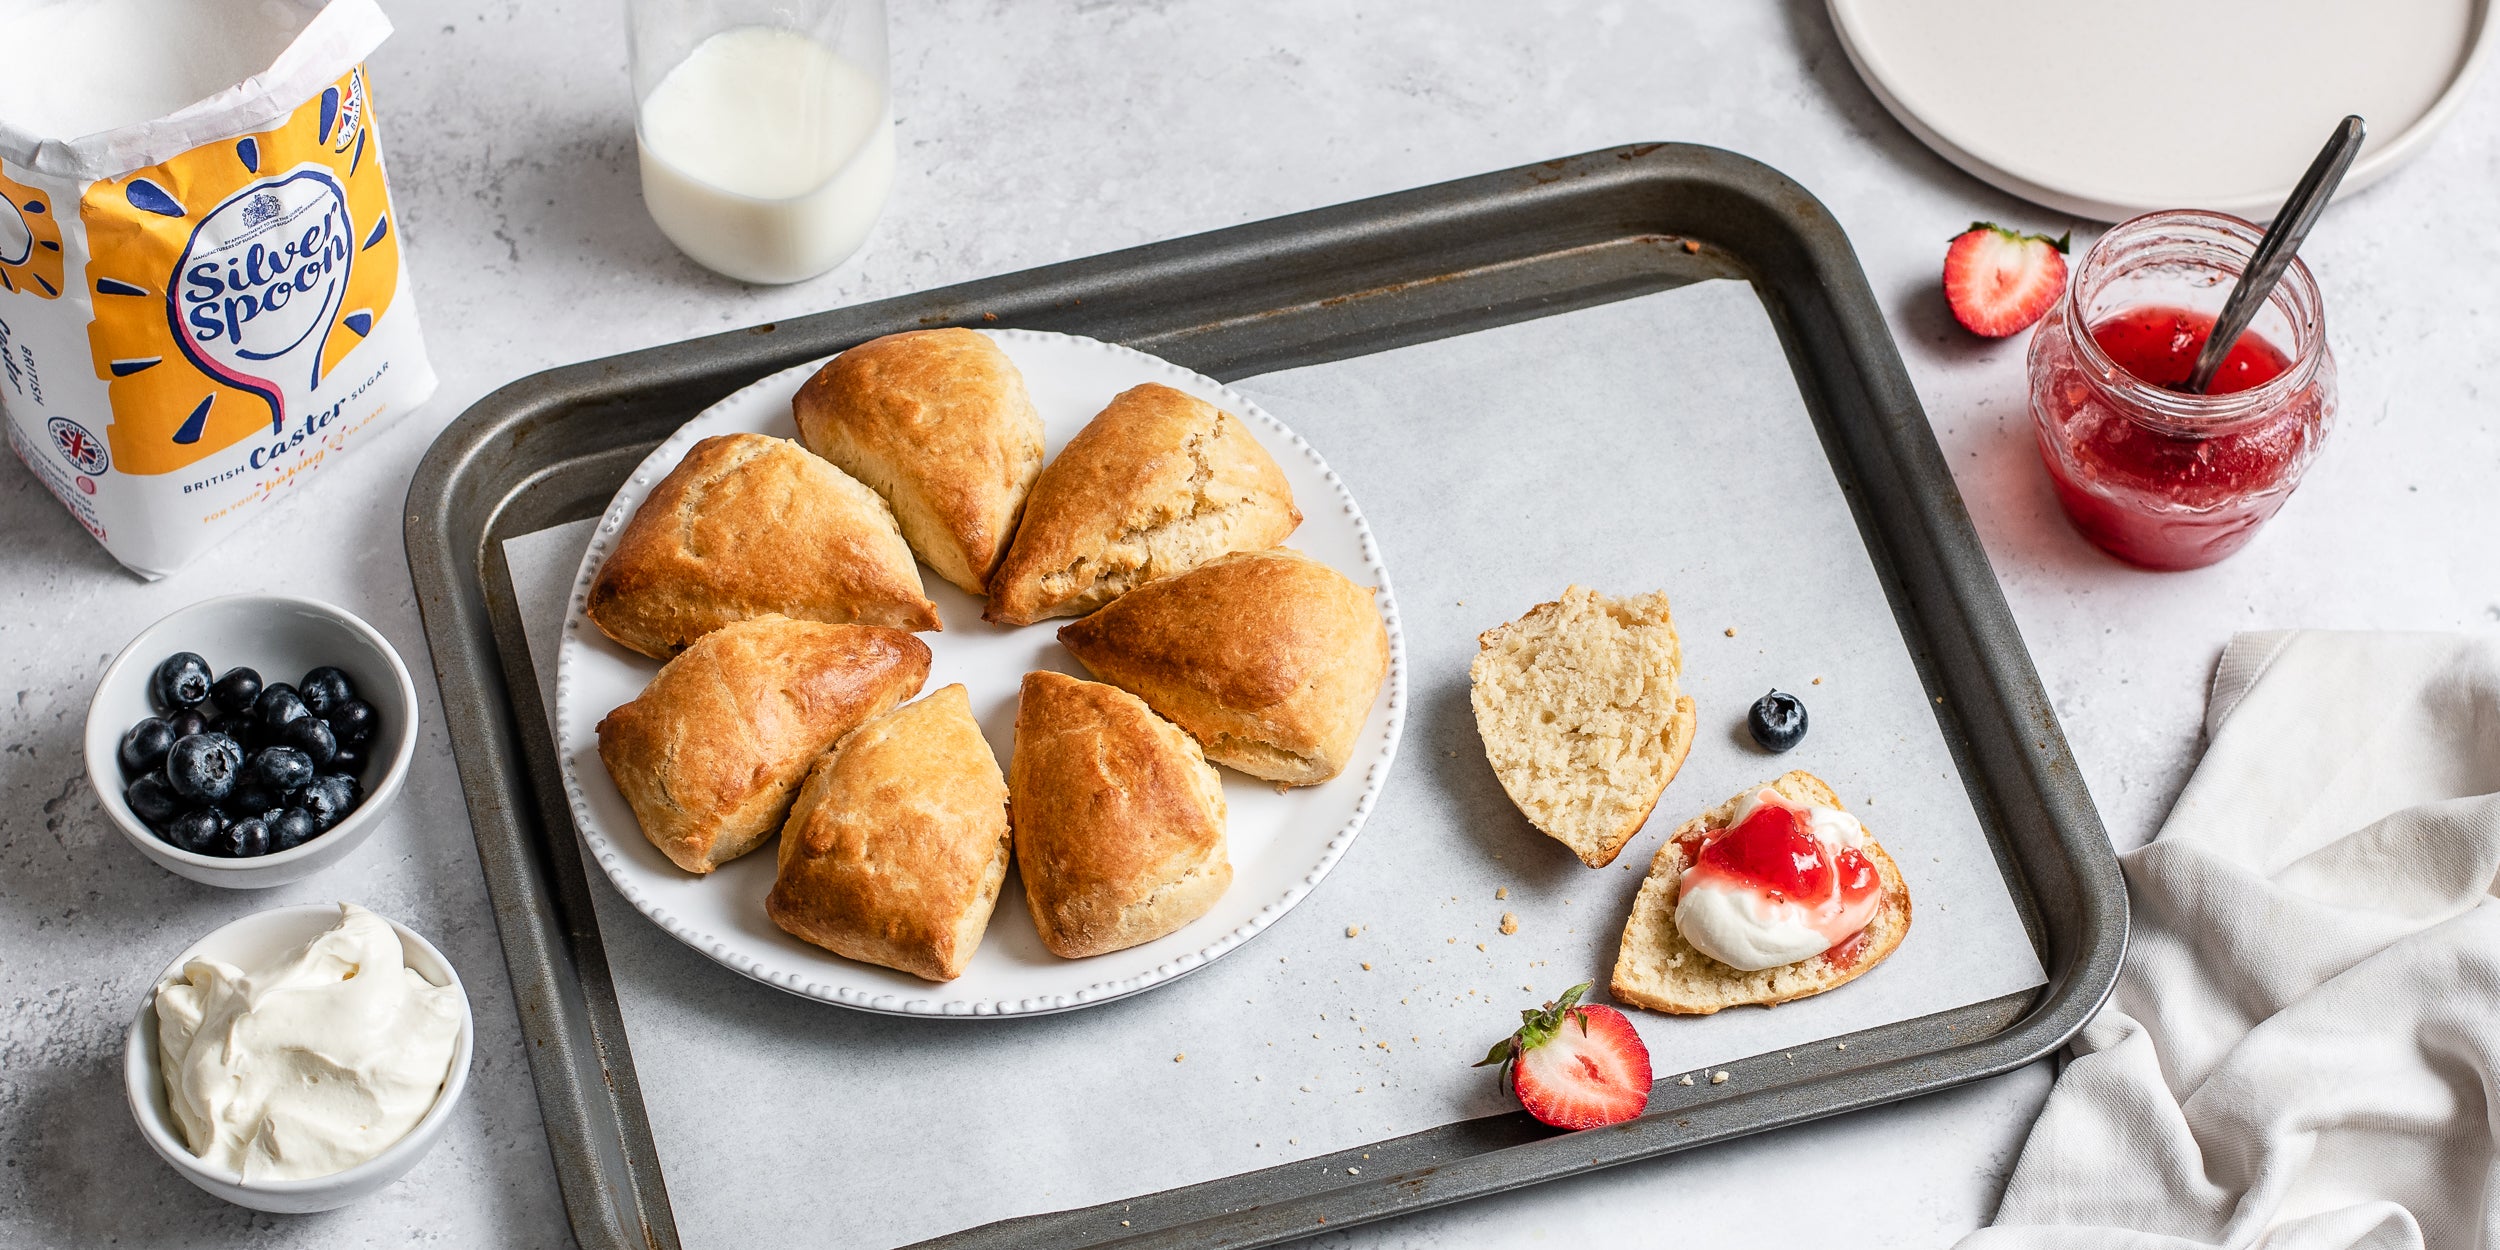 Easy Scones served on a plate, cut into portion and dolloped with cream and jam. Next to a bag of Silver Spoon caster sugar